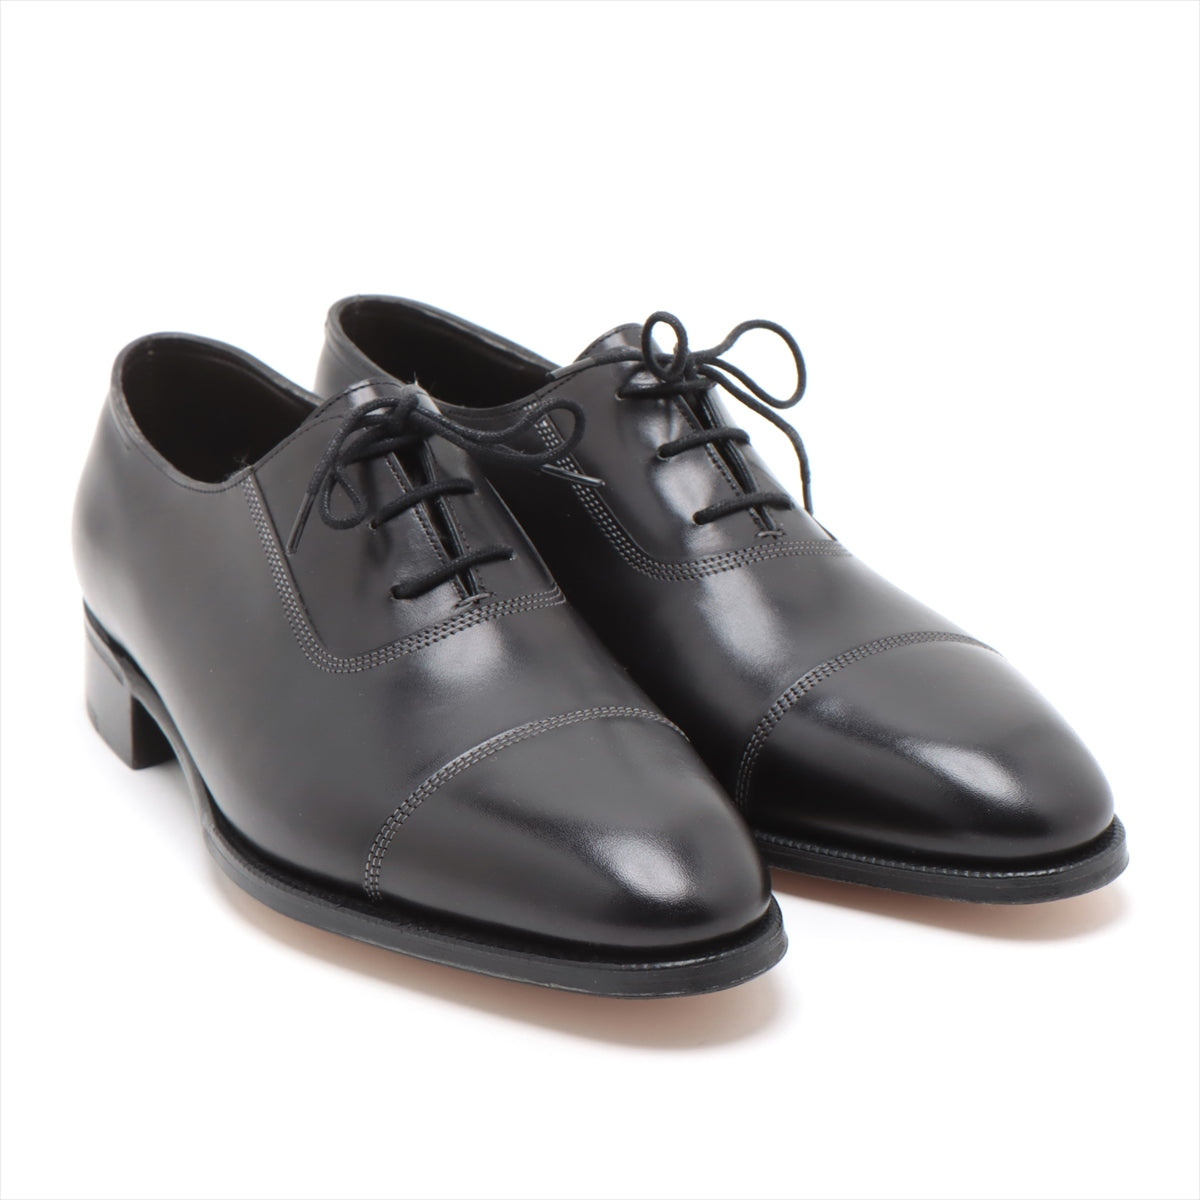 John Lobb Leather Leather shoes 7 1/2 Men's Black Straight tip Comes with genuine shoe keeper